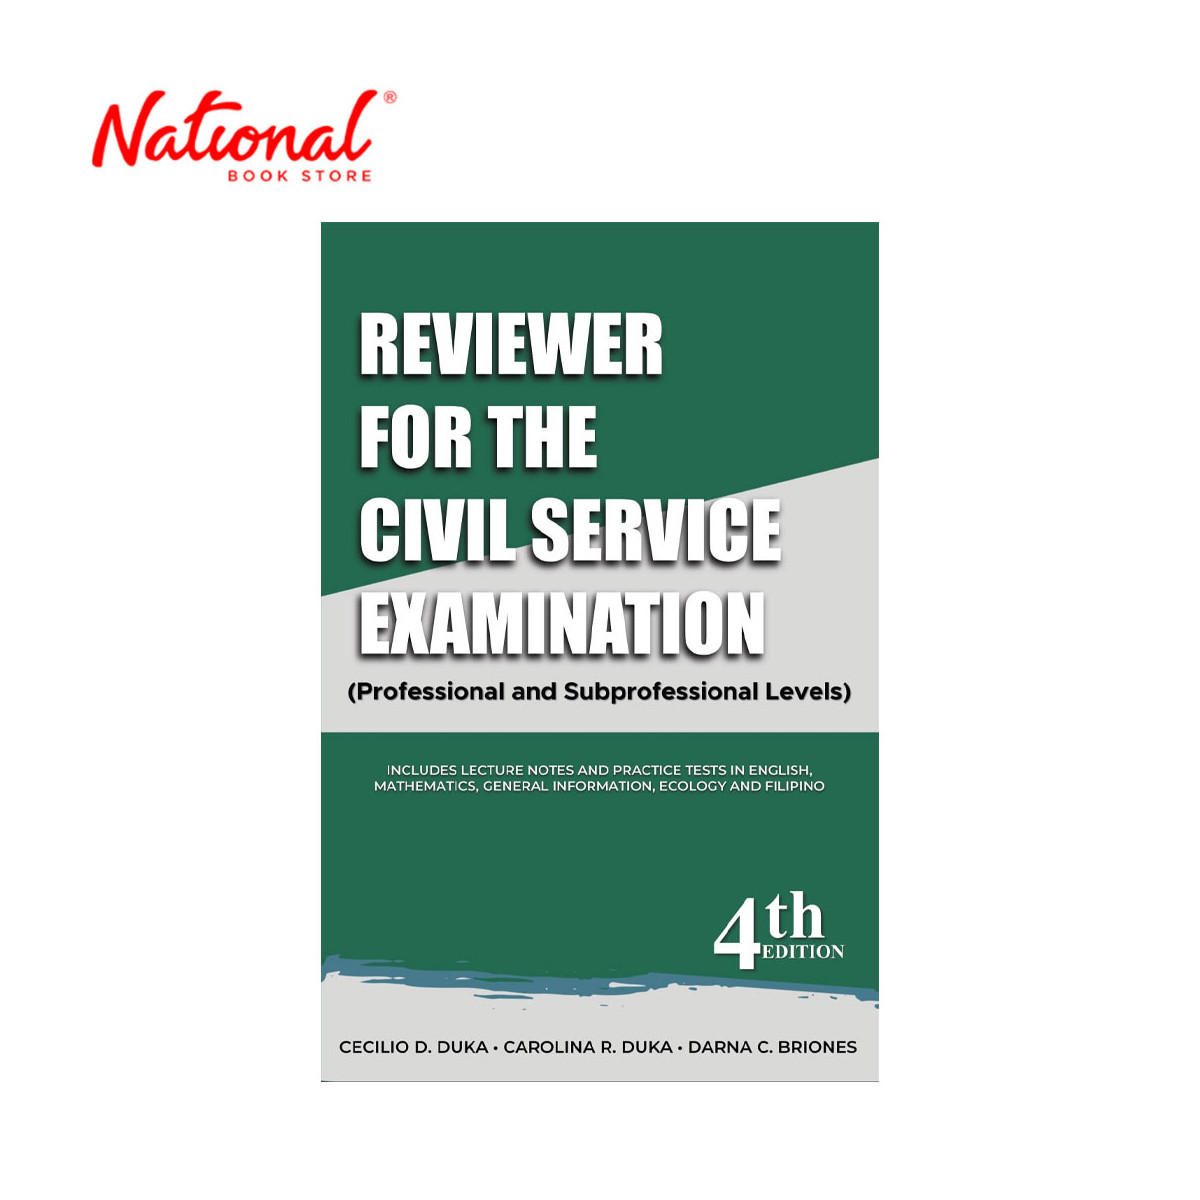 Reviewer Civil Service 4th Edition by Cecilio D. Duka - Trade Paperback - Study Guides